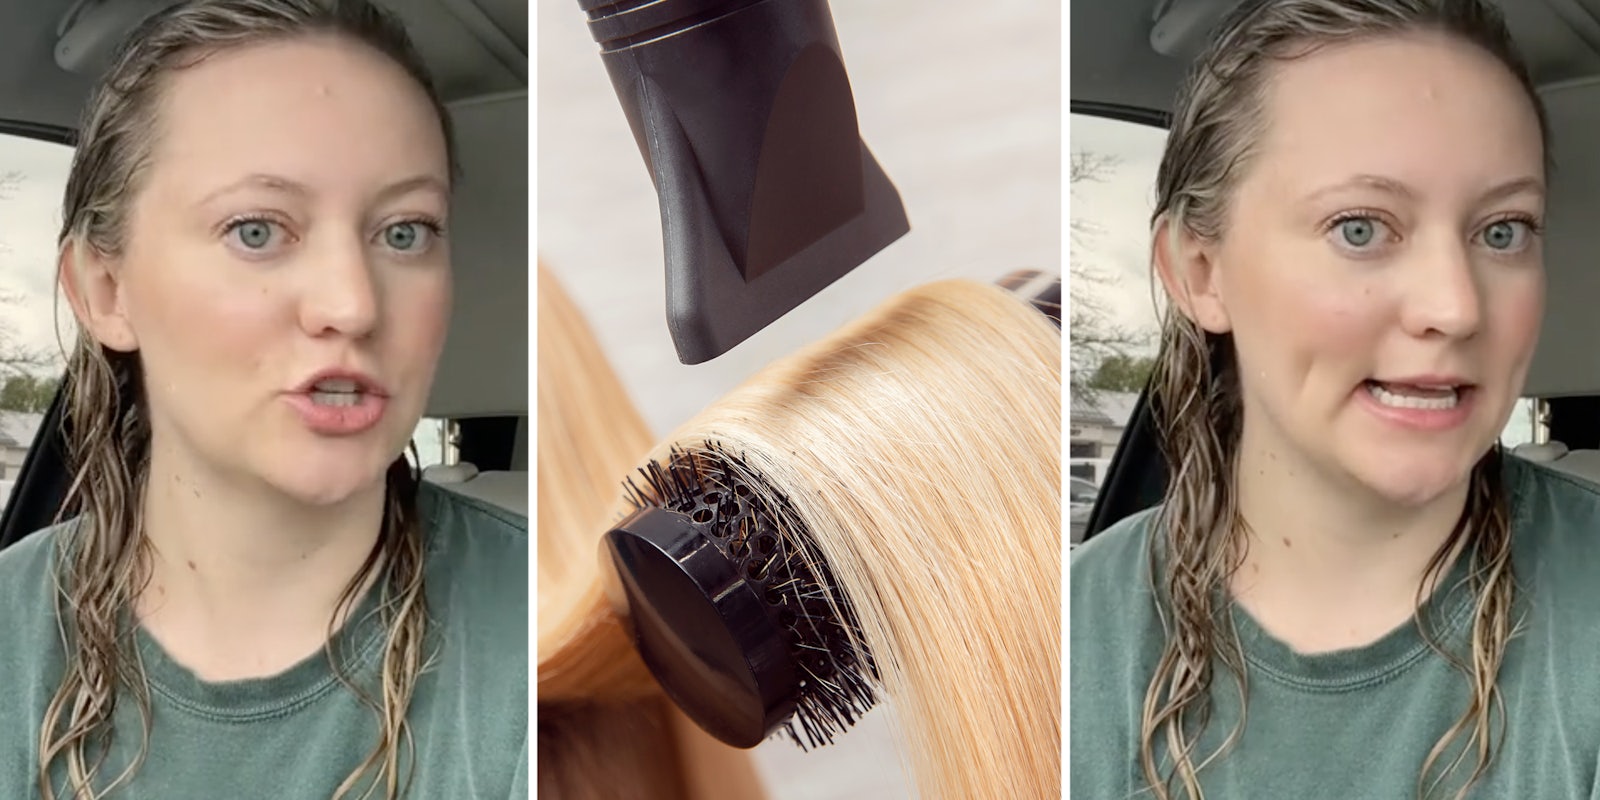 Customer Says Salon Tried To Charge $40 To Dry Her Hair